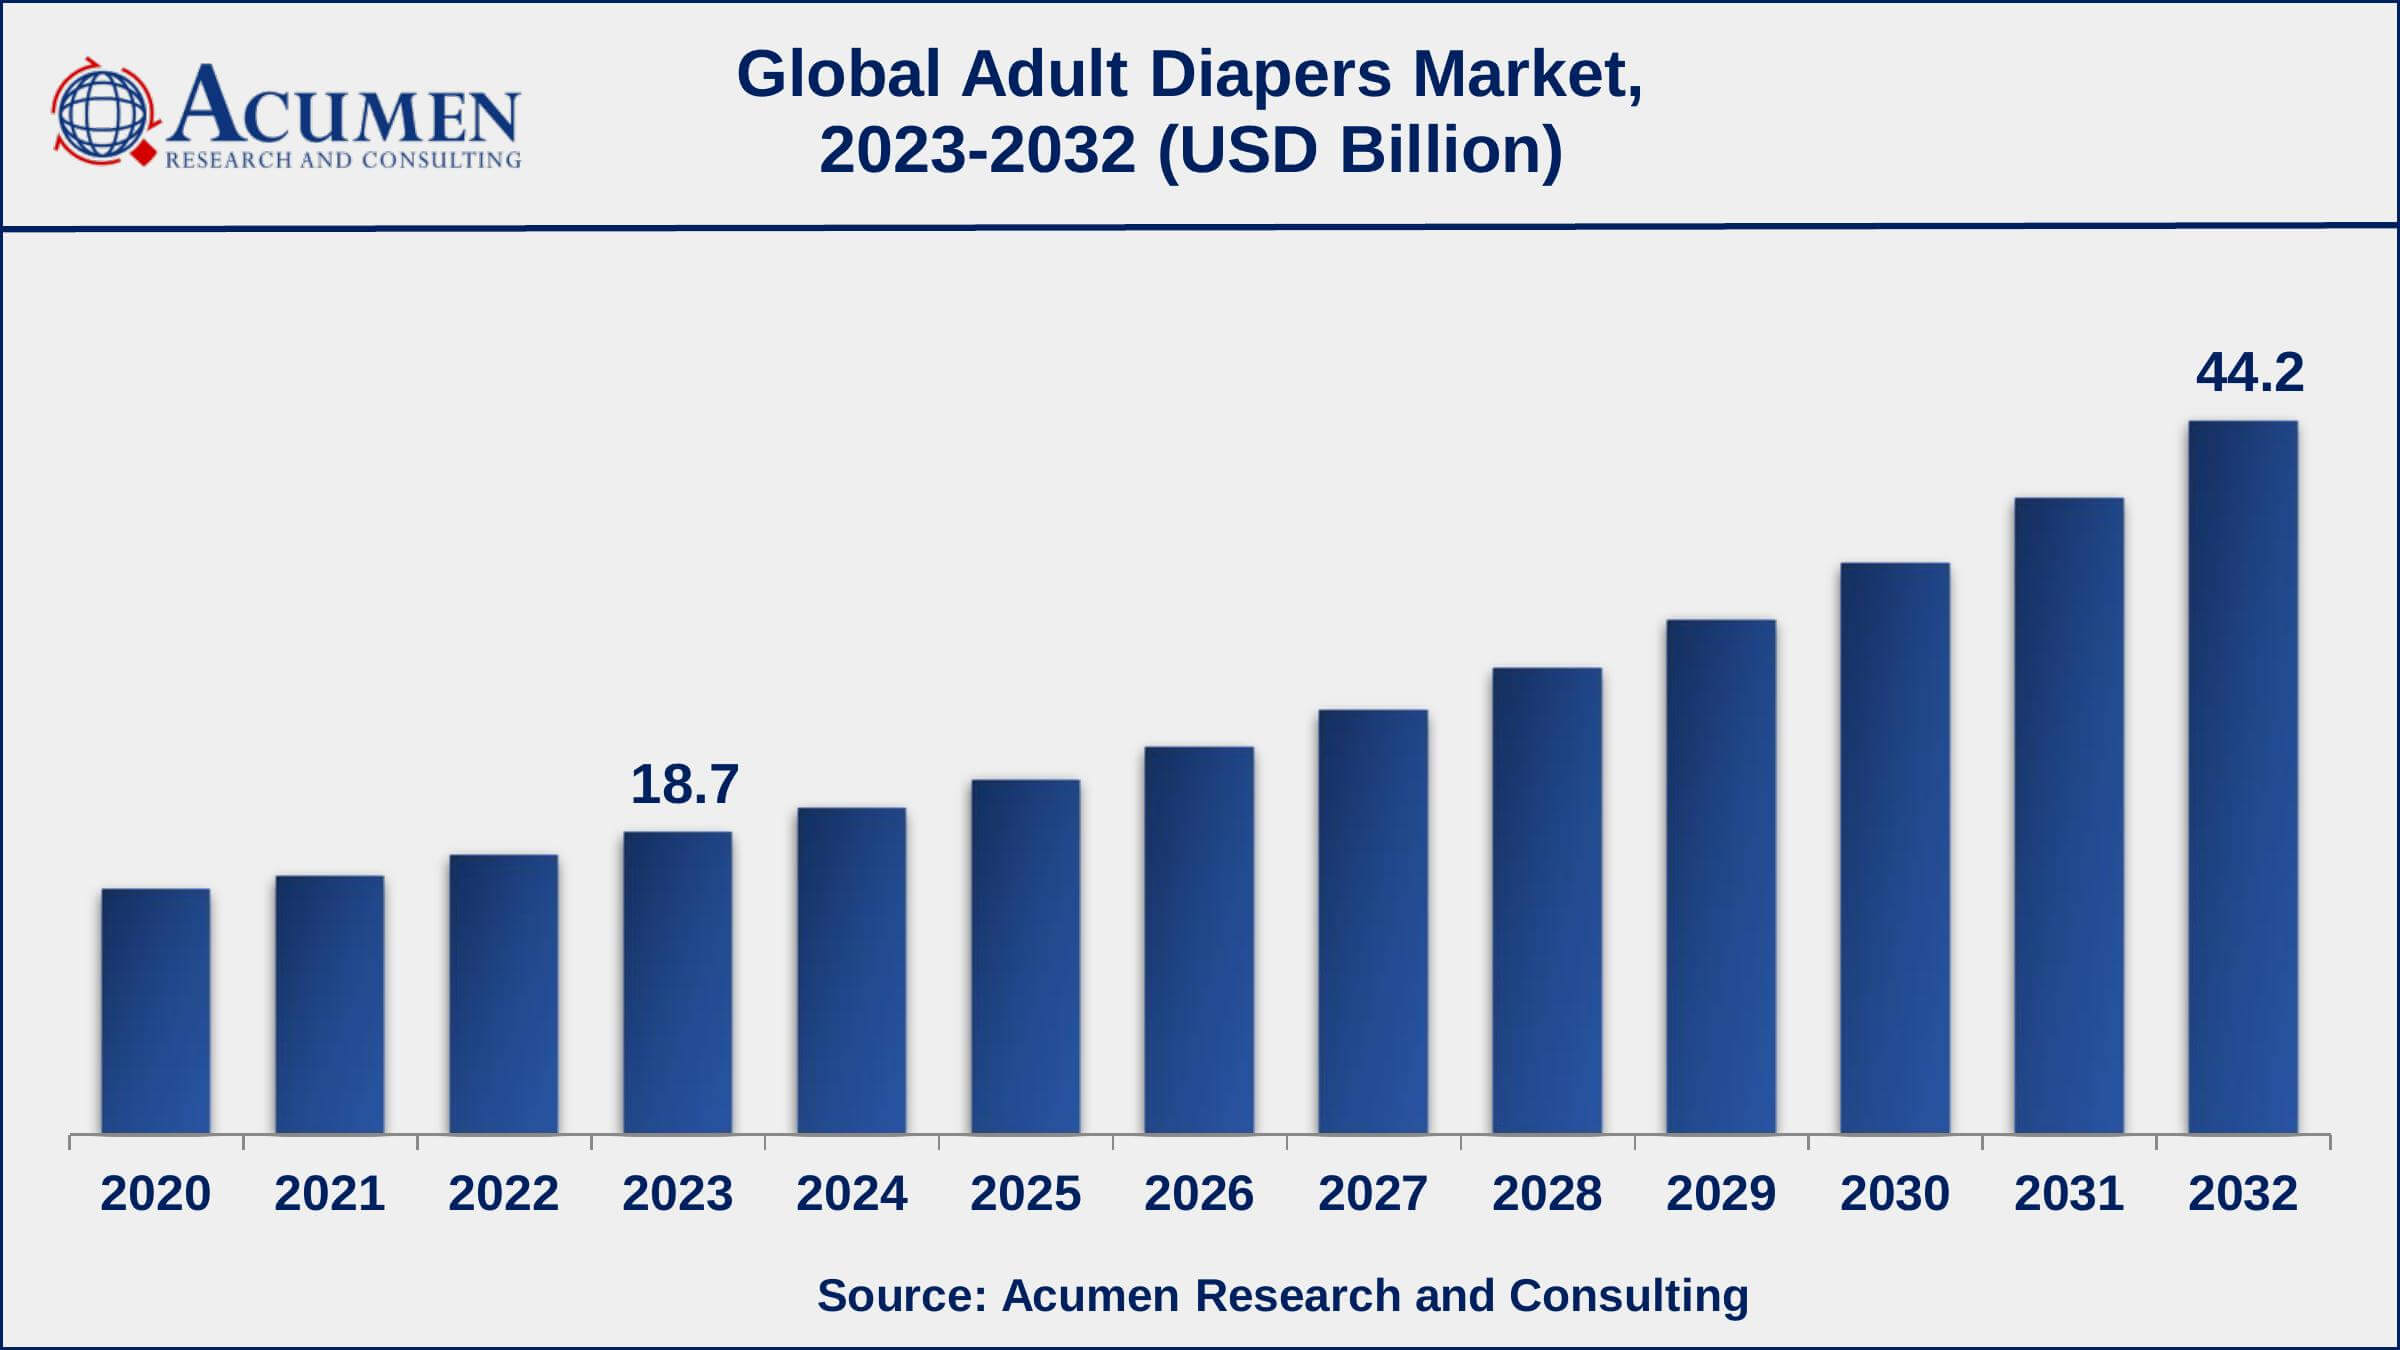 Global Adult Diapers Market Dynamics